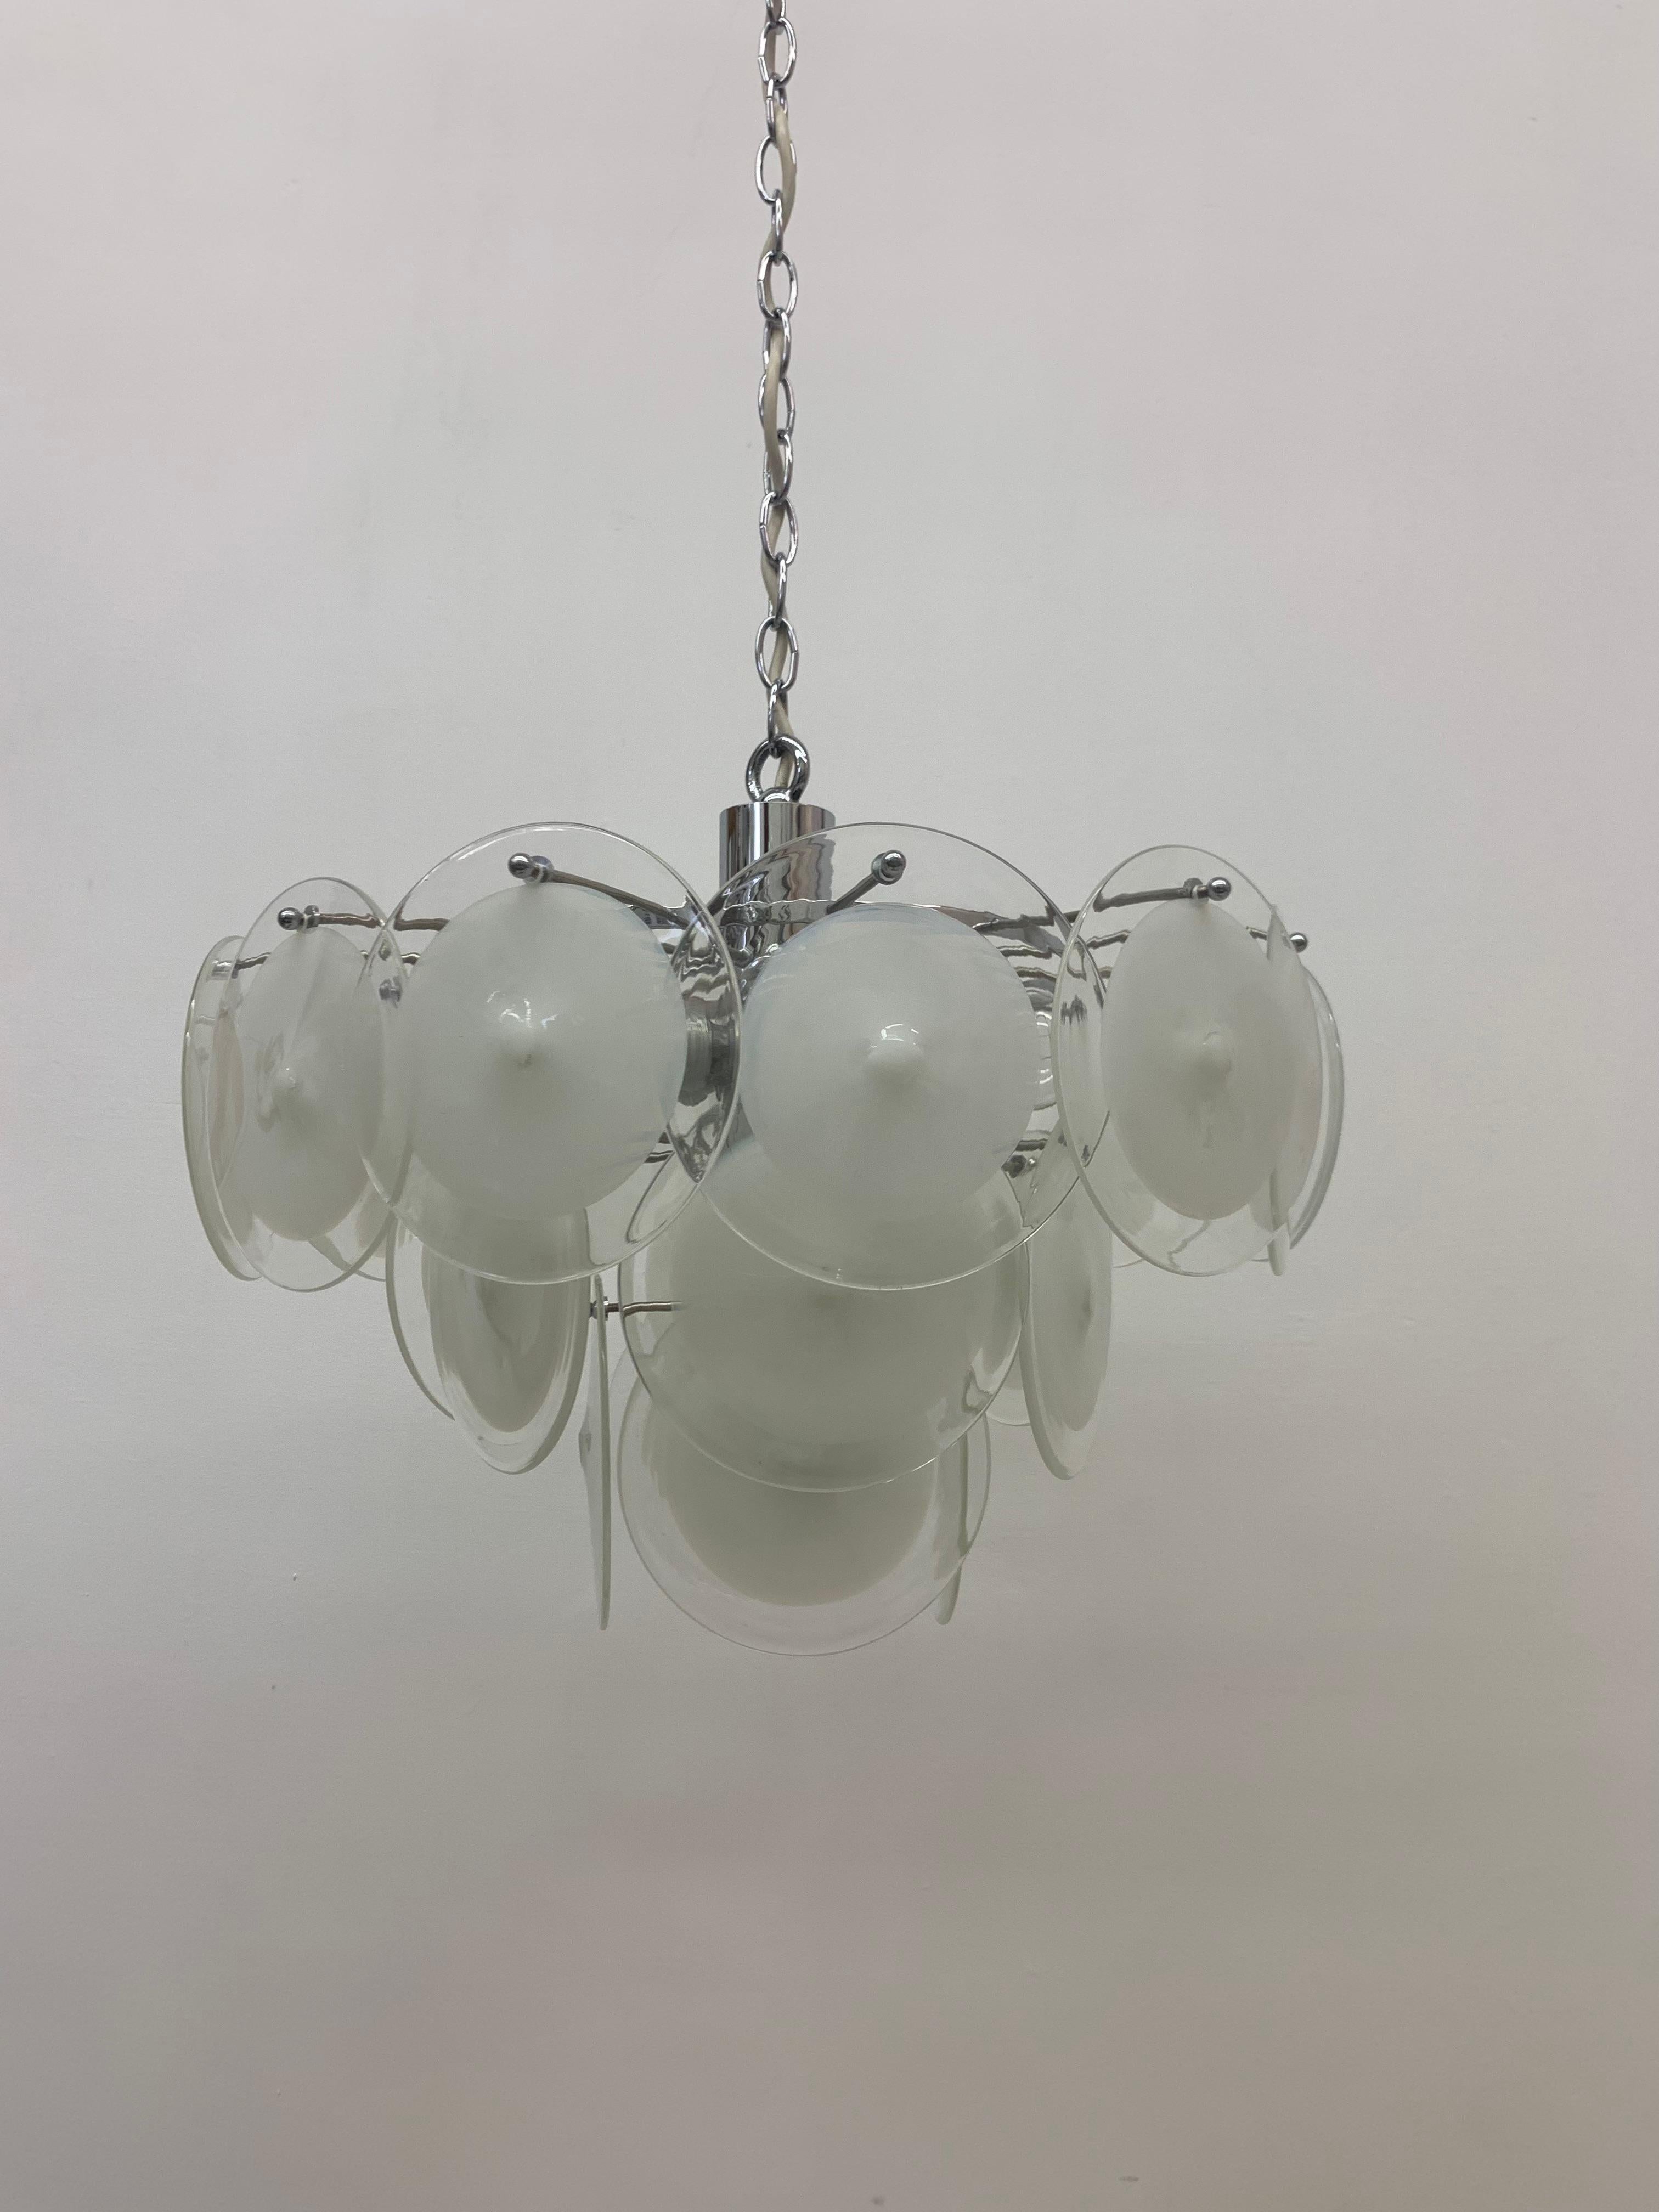 Italian Disc Chandelier by Vistosi Murano Glass, Italy, 1970s For Sale 4